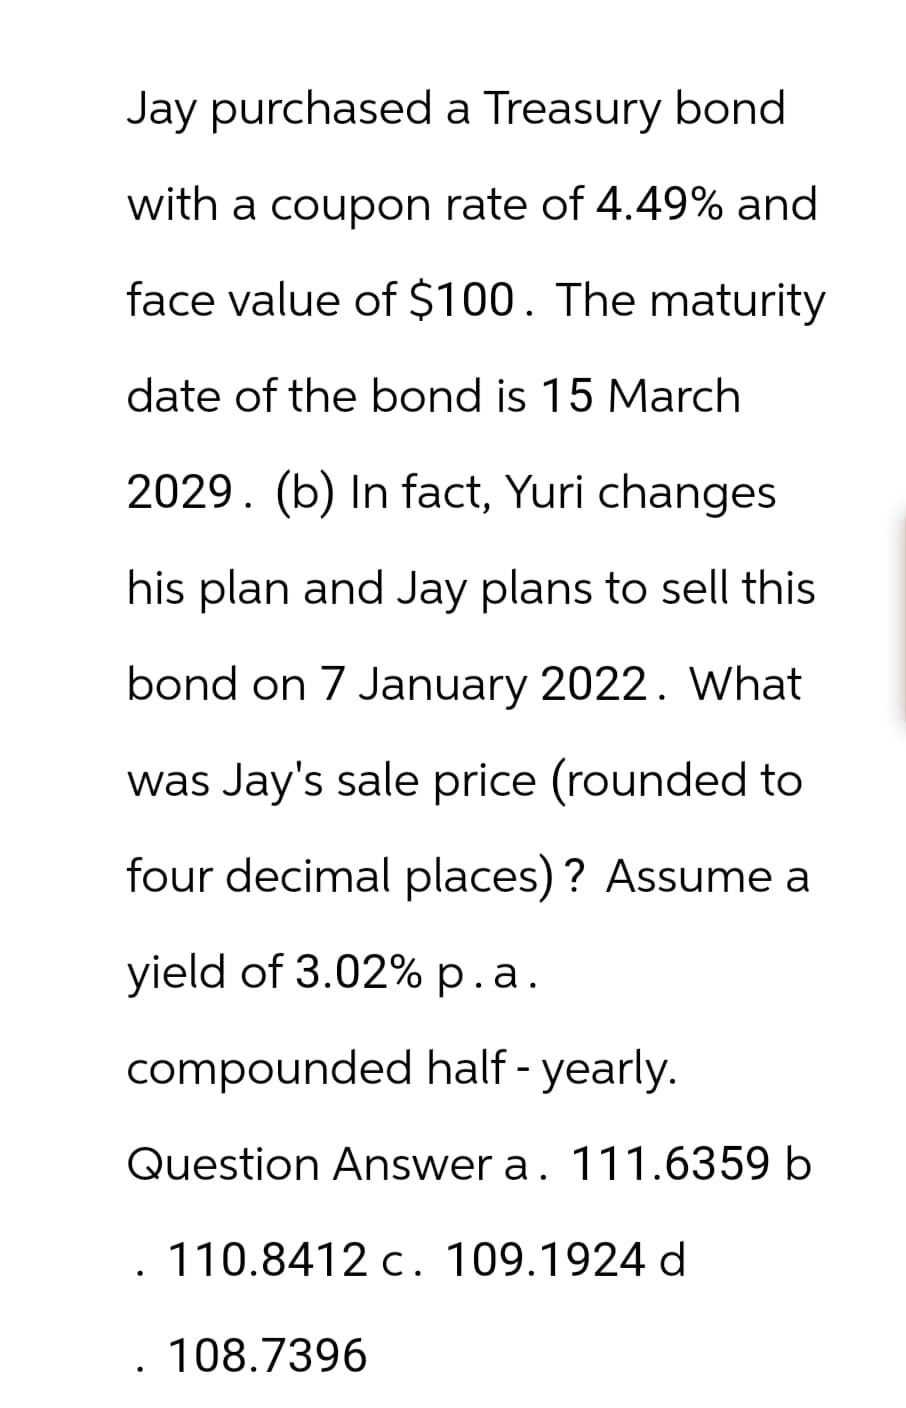 Jay purchased a Treasury bond
with a coupon rate of 4.49% and
face value of $100. The maturity
date of the bond is 15 March
2029. (b) In fact, Yuri changes
his plan and Jay plans to sell this
bond on 7 January 2022. What
was Jay's sale price (rounded to
four decimal places)? Assume a
yield of 3.02% p.a.
compounded half - yearly.
Question Answer a. 111.6359 b
110.8412 c. 109.1924 d
.108.7396